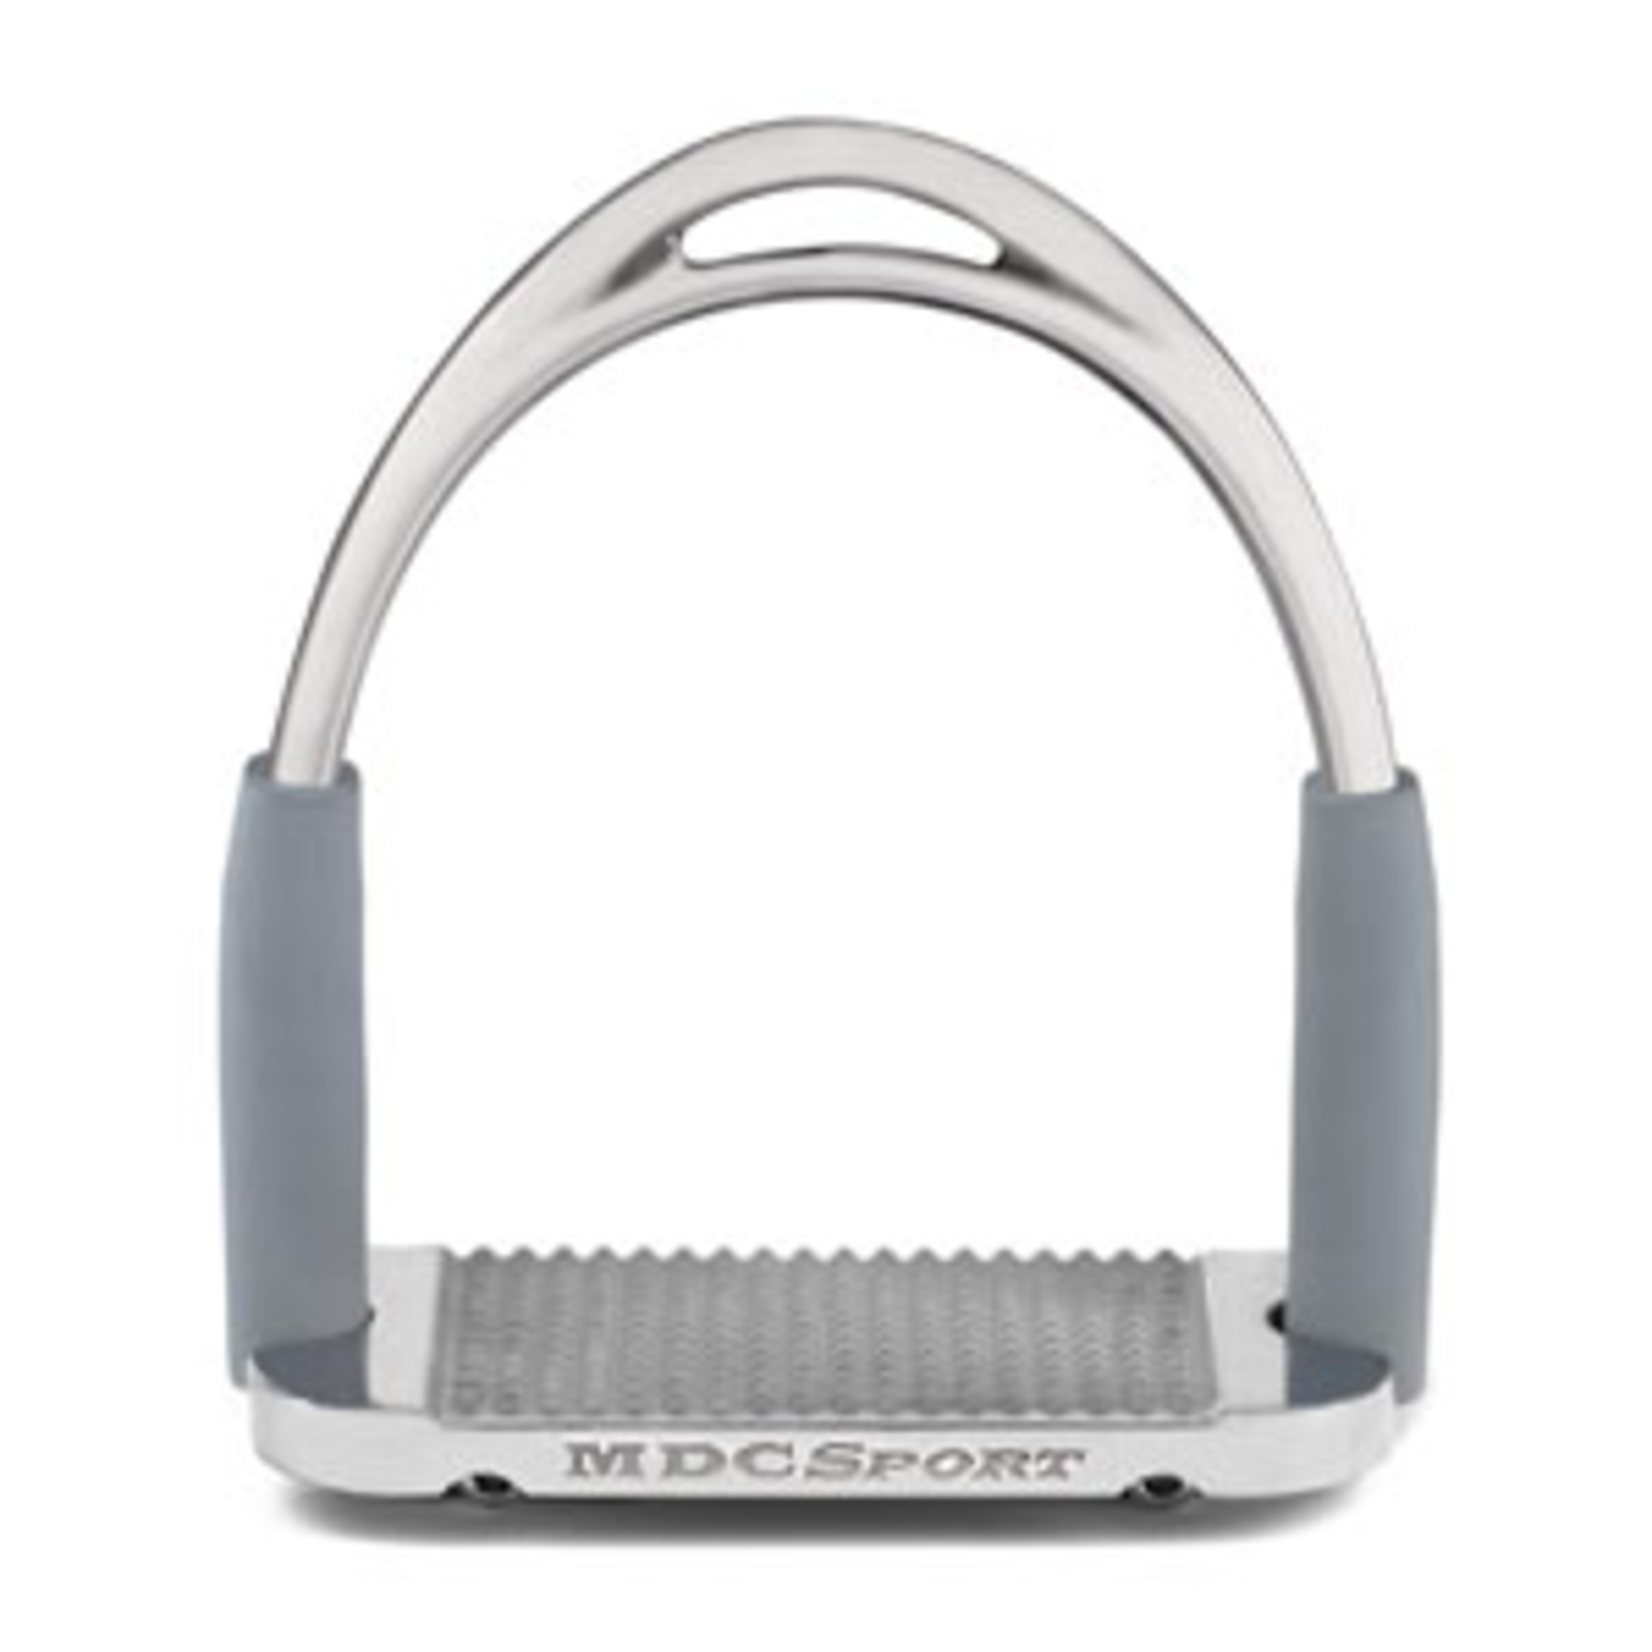 MDC MDC ’S’ Flex Stirrup with Patented ’S’ Technology Top 45 degrees, Flex Sides, Wide Aluminum Treads